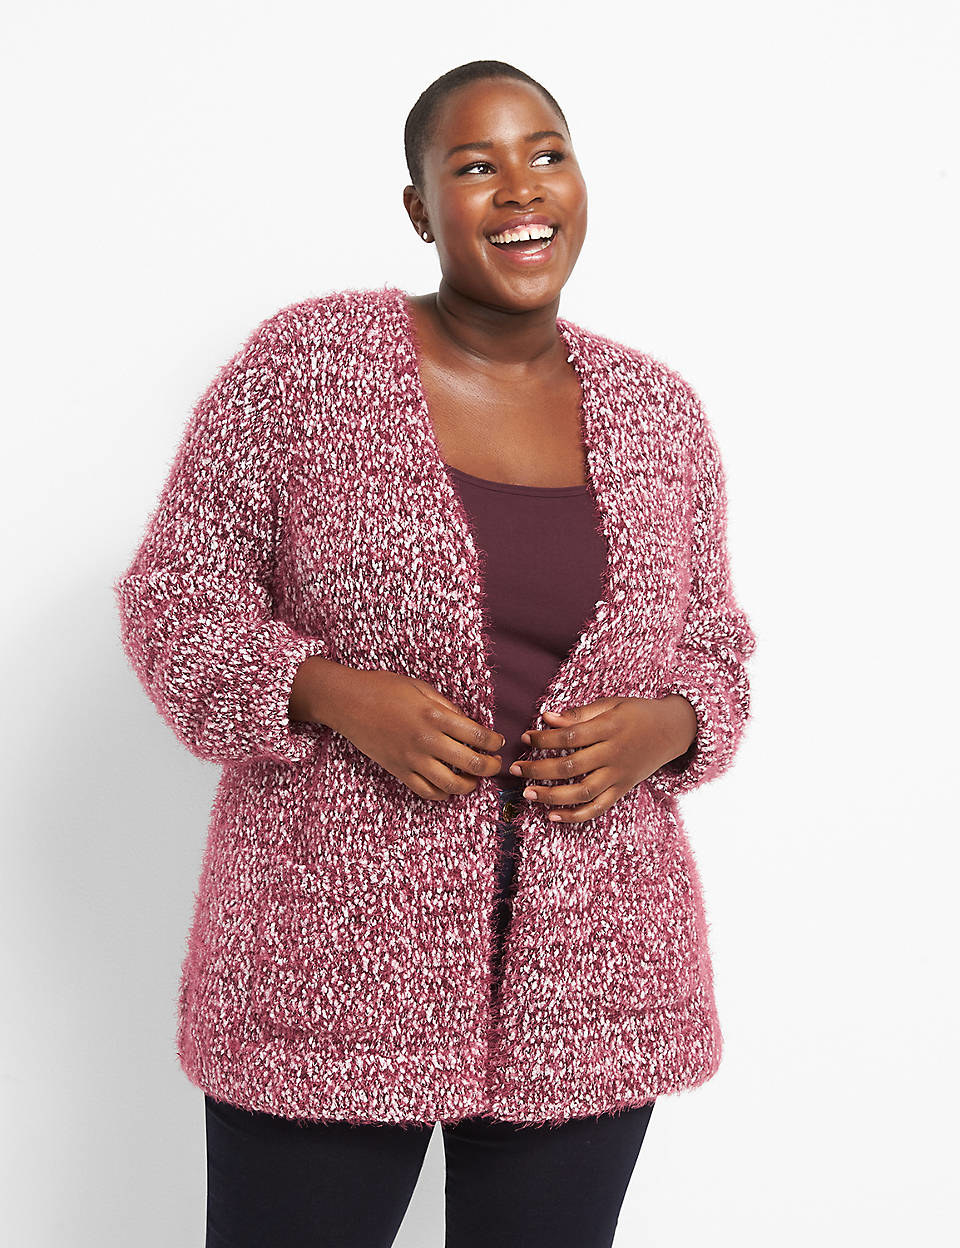 model wearing the cardigan in pink and white